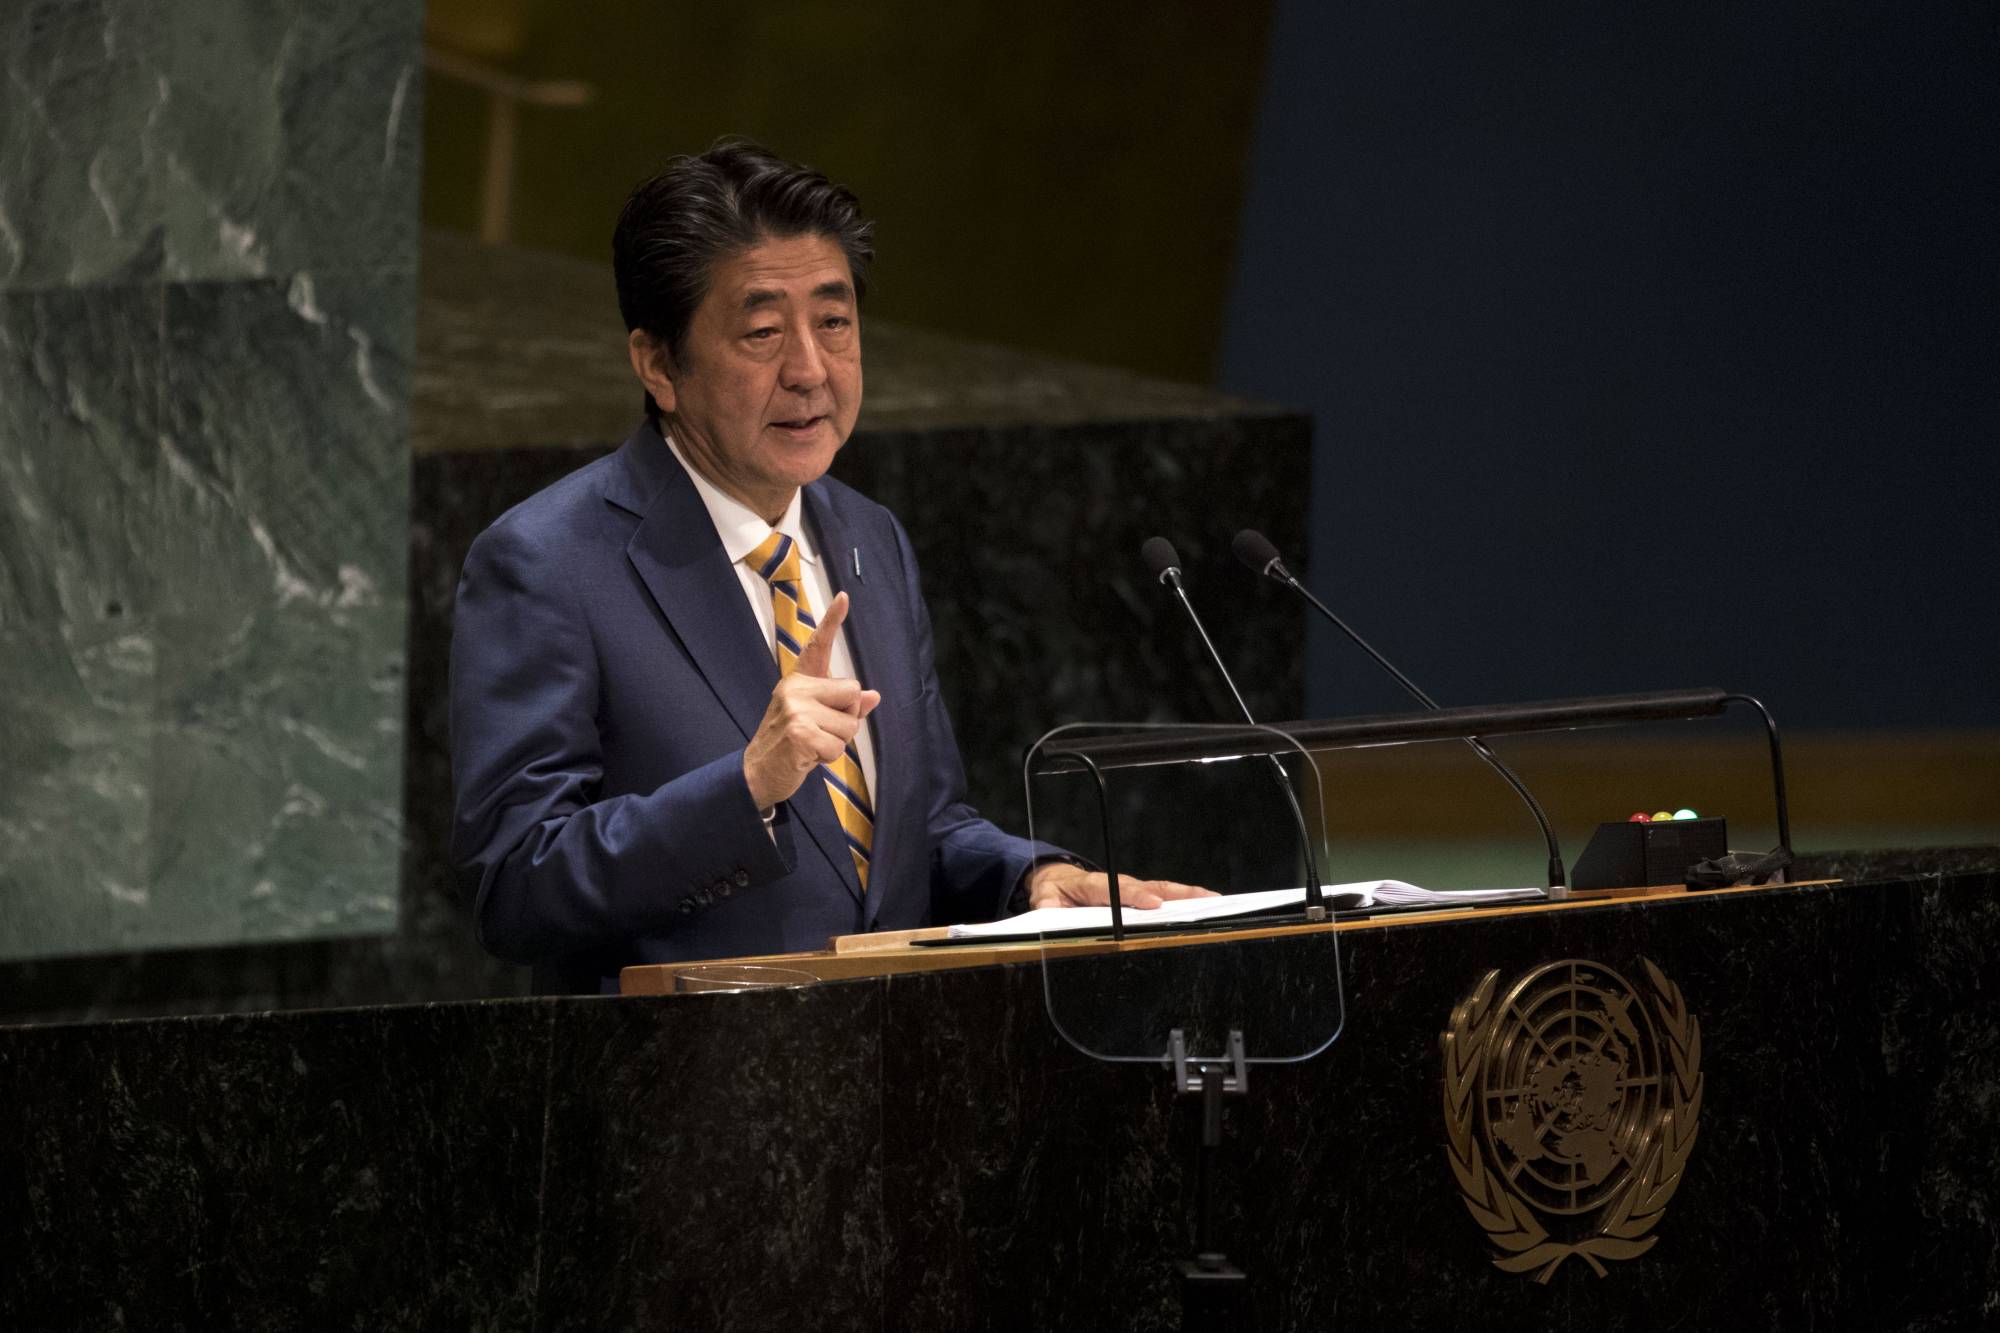 Then-Prime Minister Shinzo Abe addresses the United Nations General Assembly in New York on Sept. 24, 2019. | DAVE SANDERS / THE NEW YORK TIMES